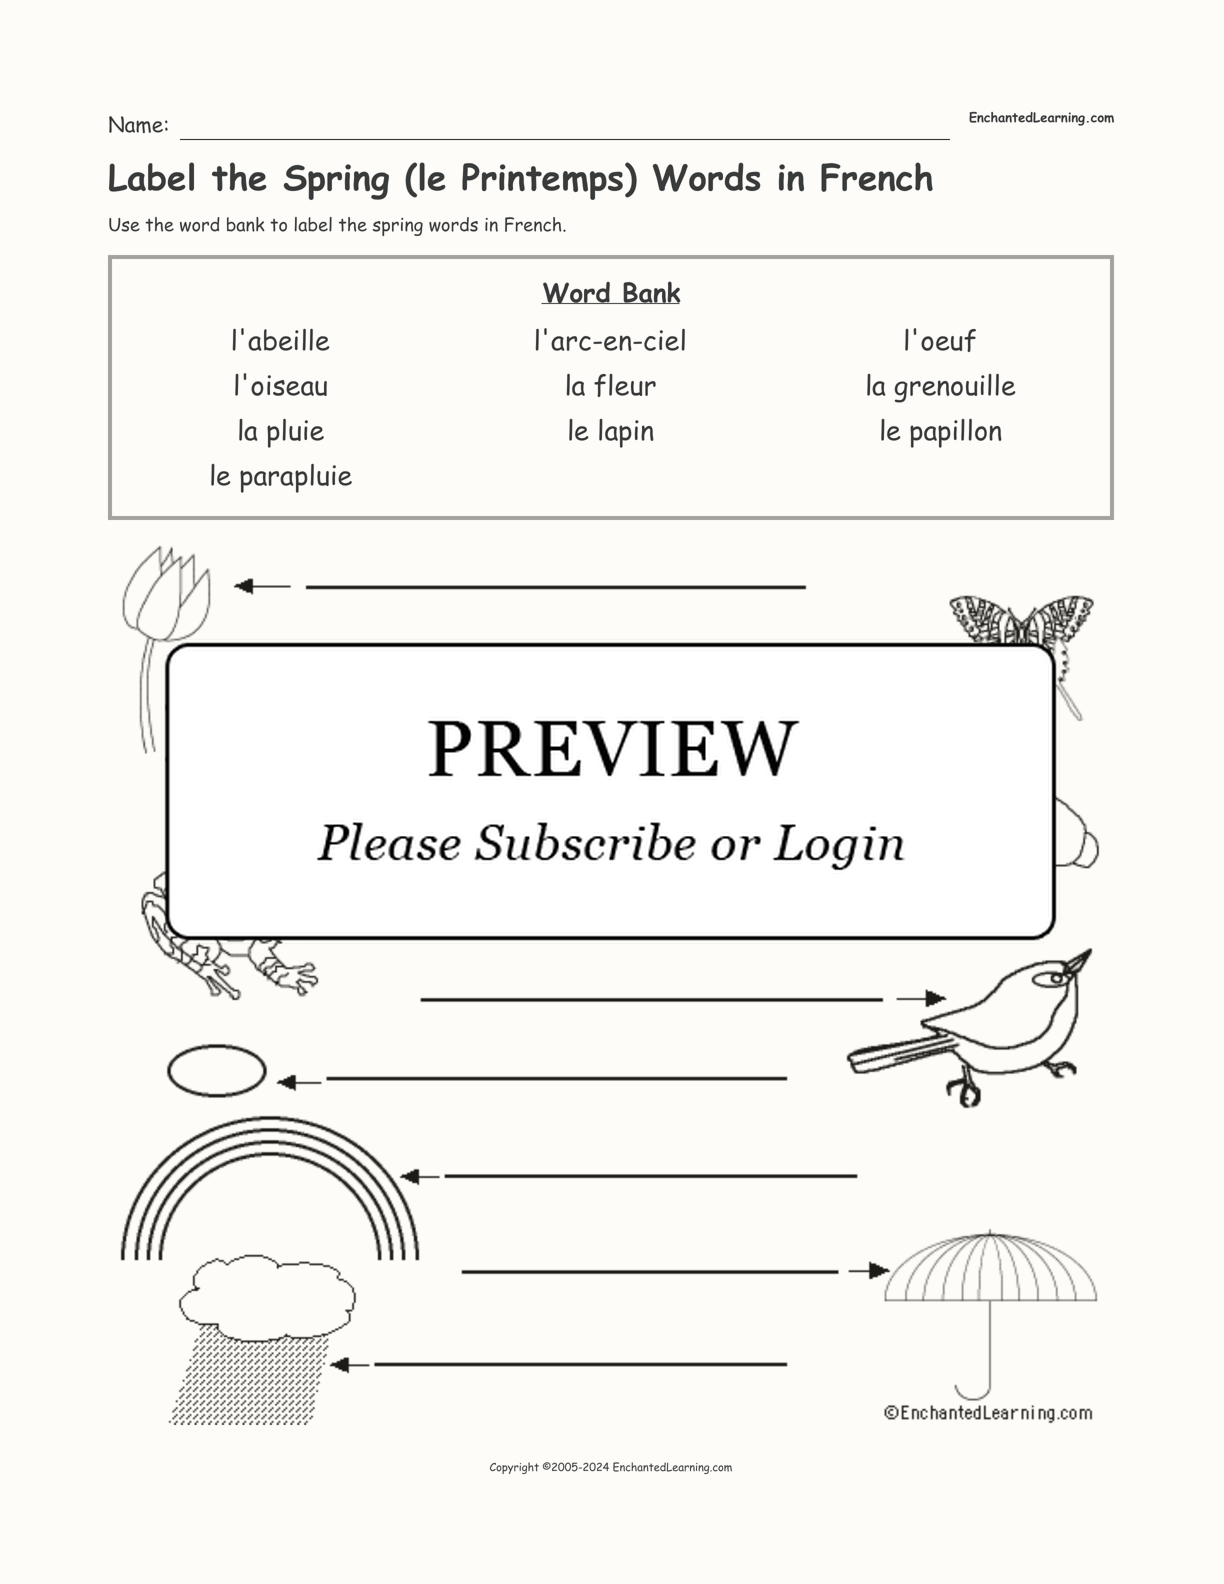 Label the Spring (le Printemps) Words in French interactive worksheet page 1